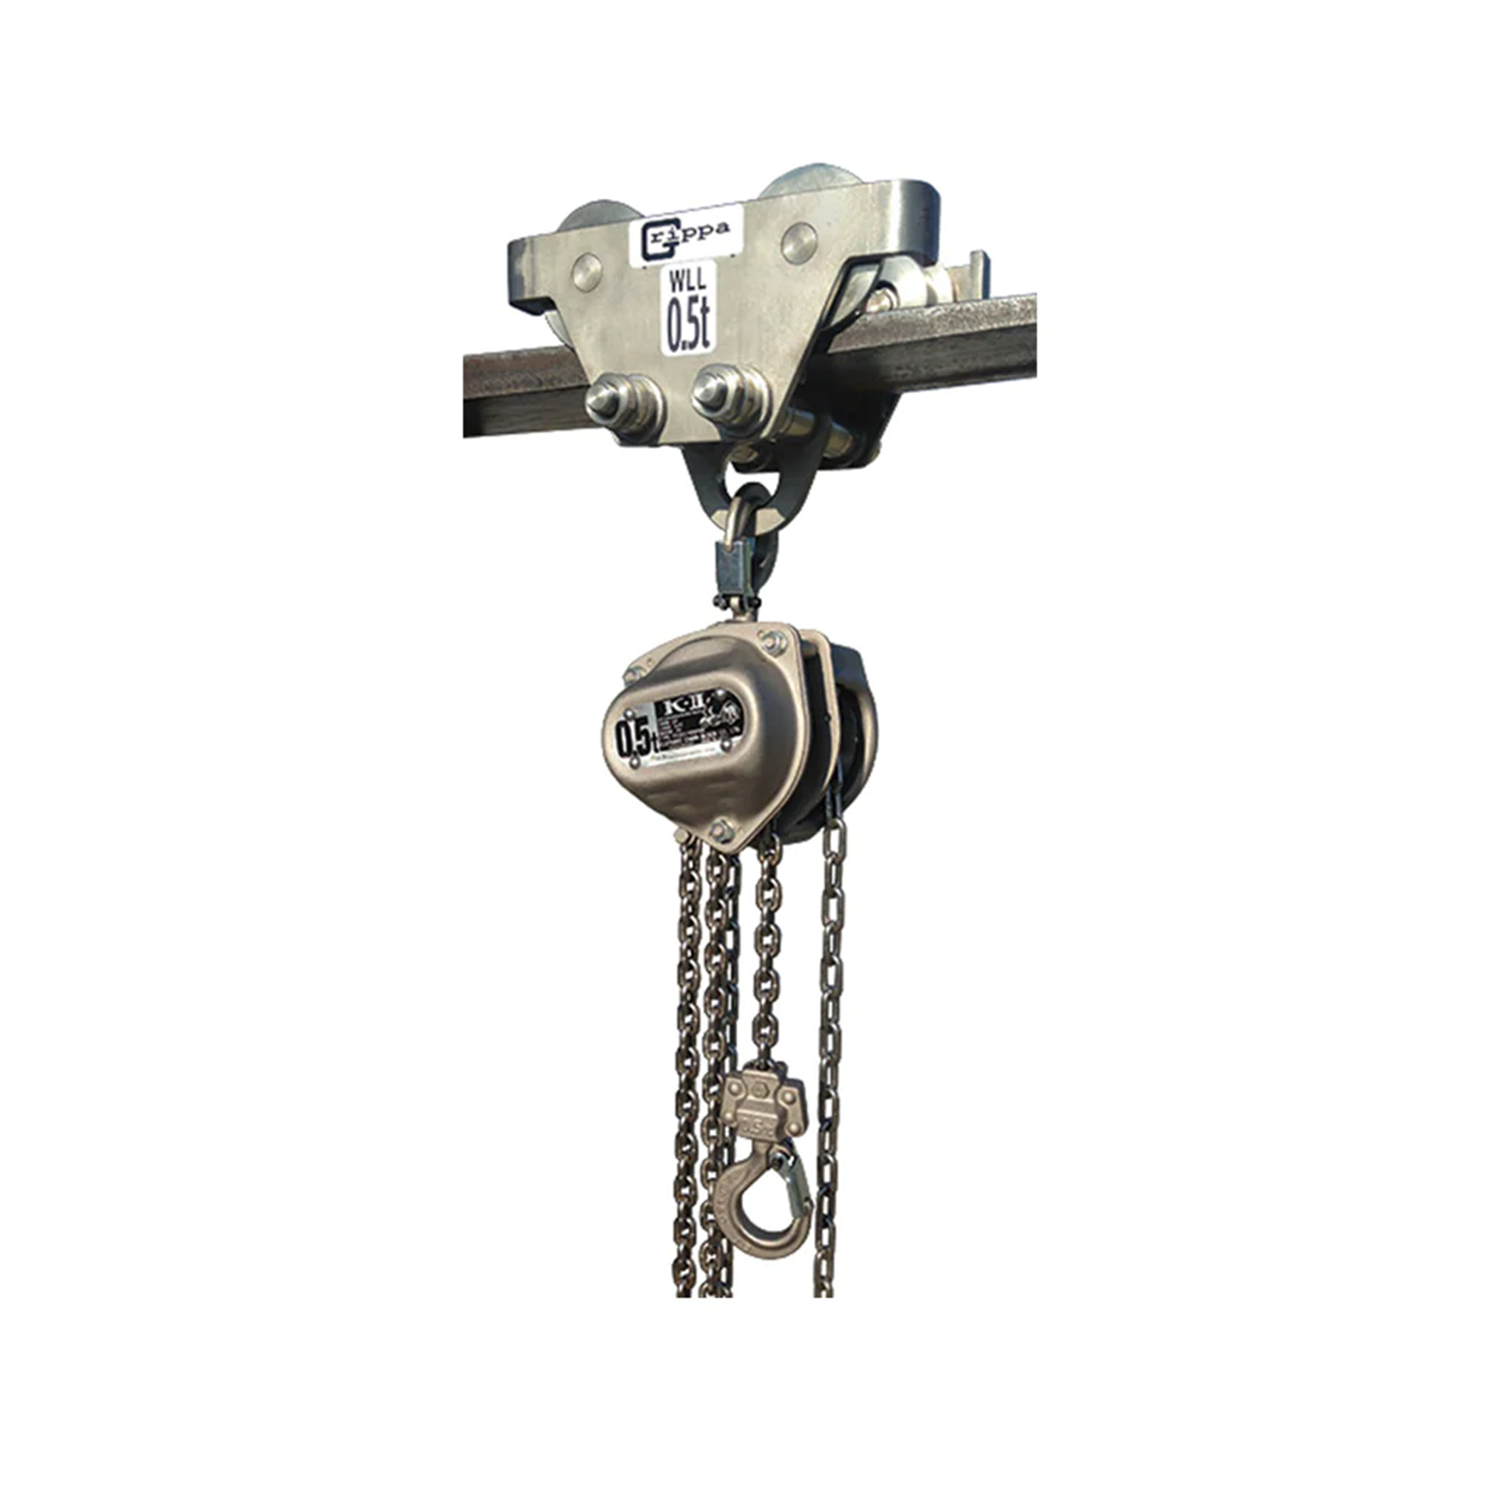 Non-Corrosive / Explosion Proof / Atex Rated Hoists